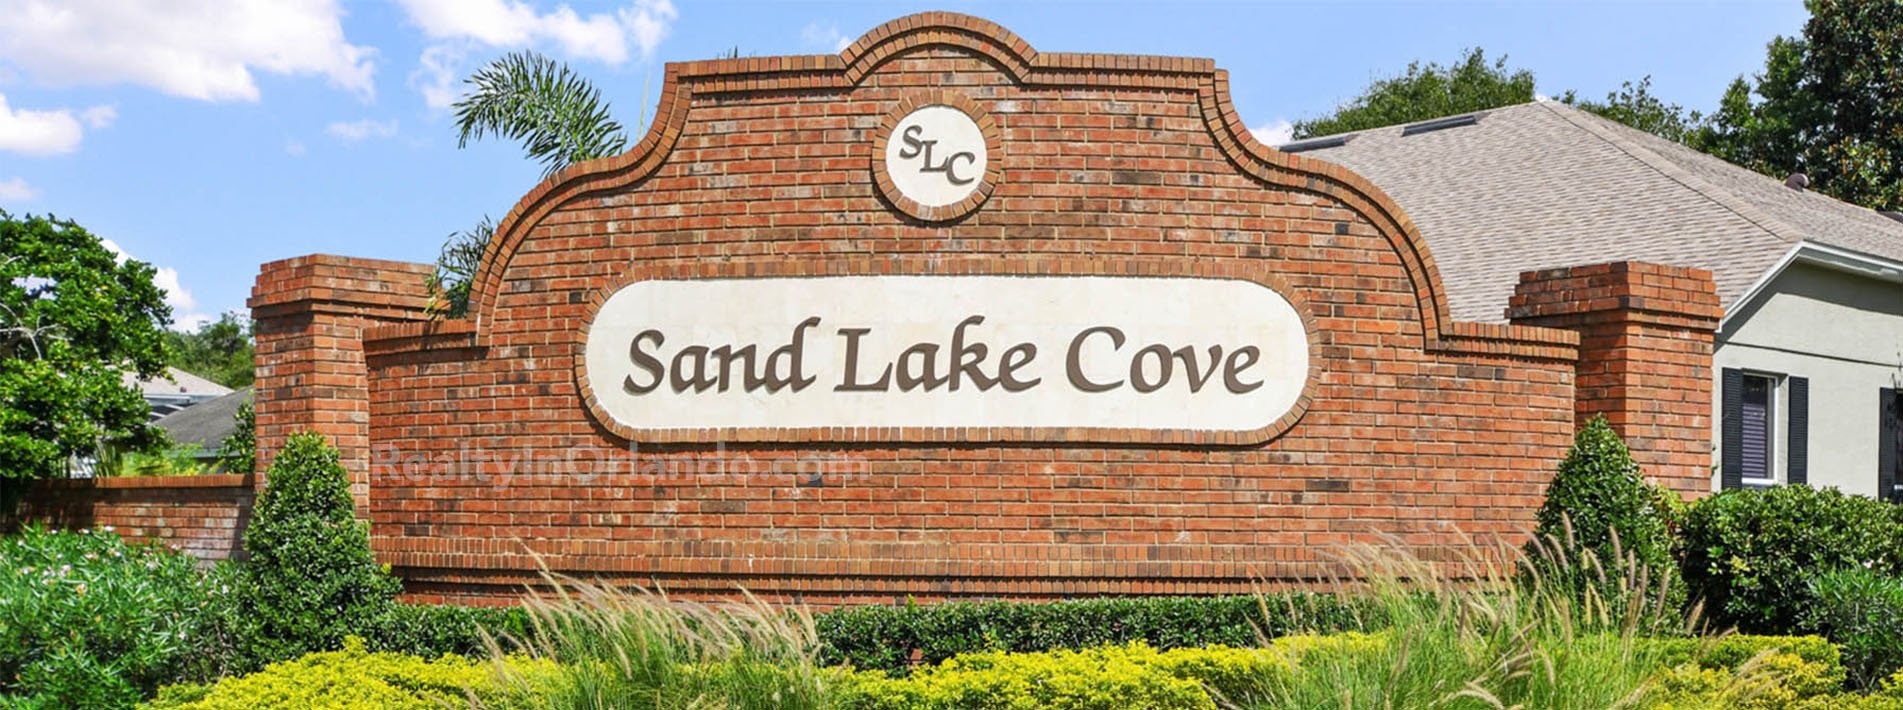 Sand Lake Cove Dr Phillips